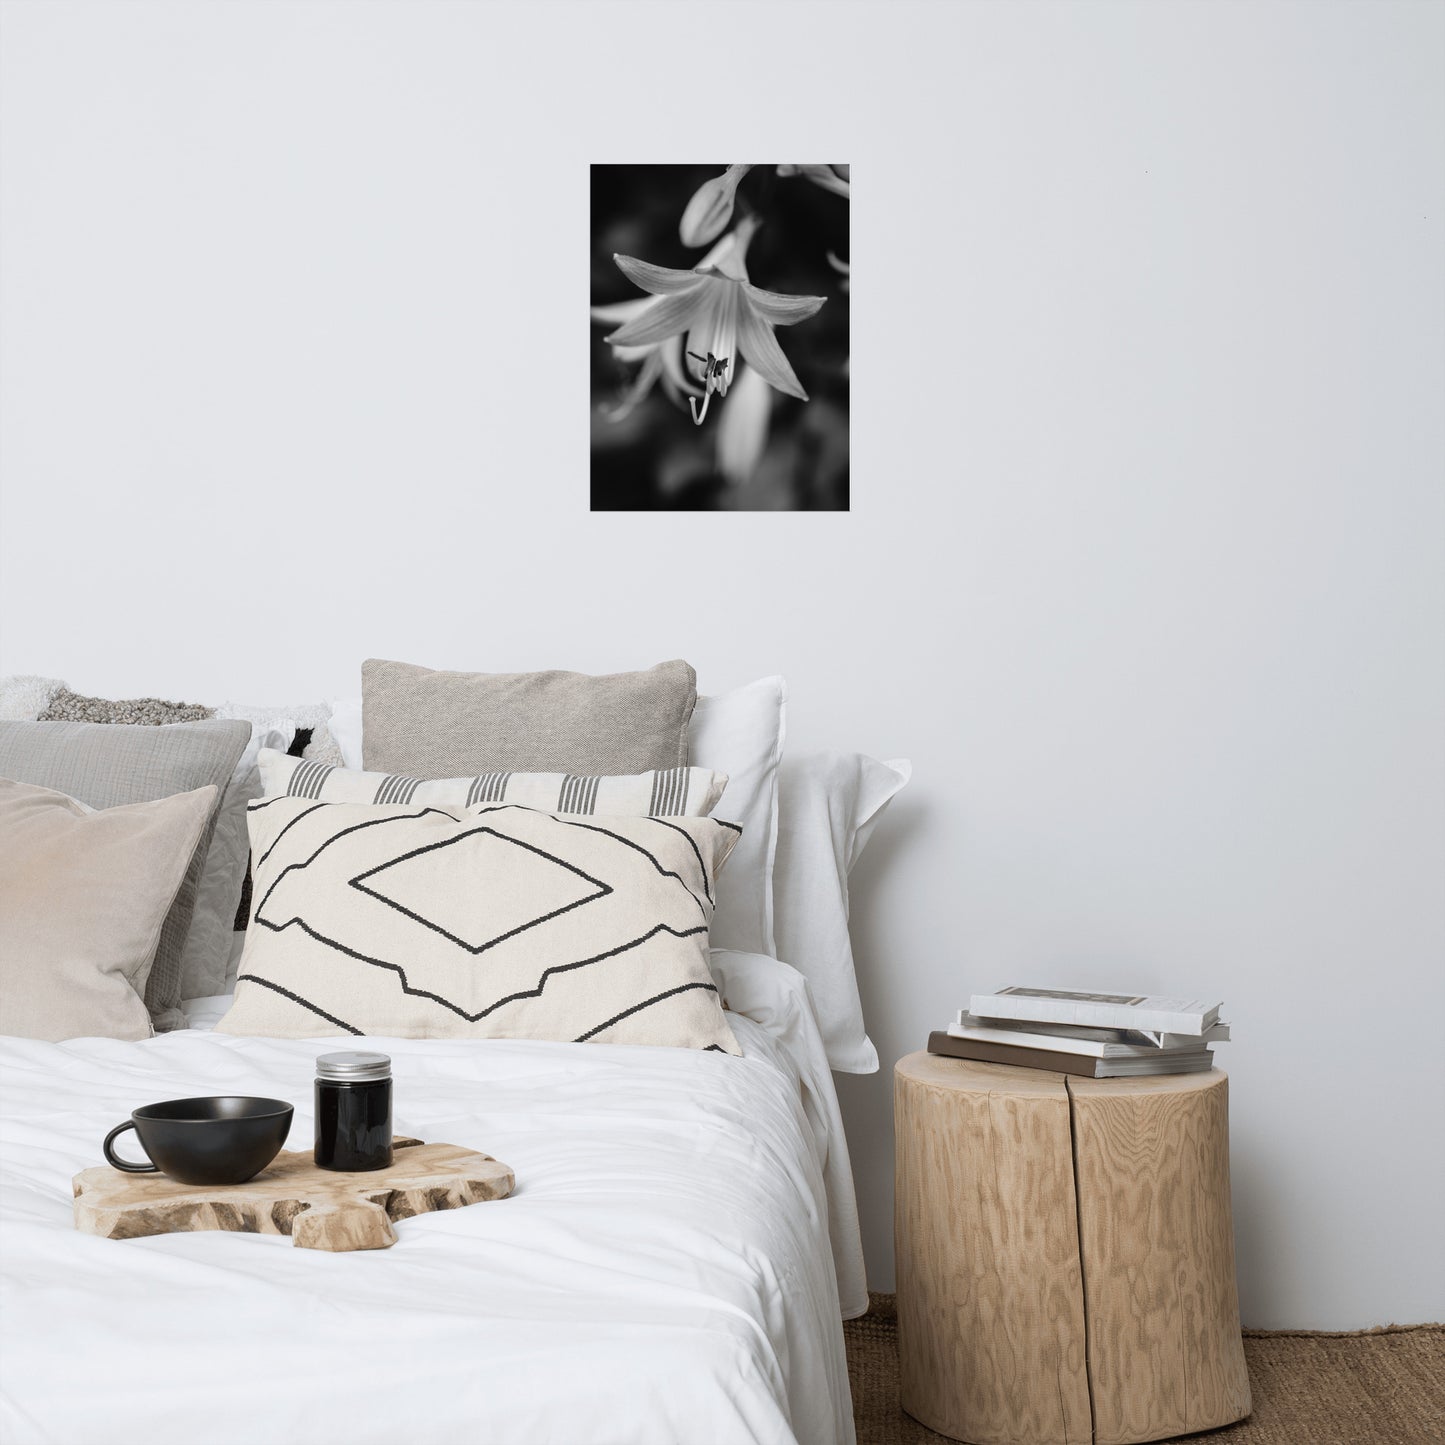 Hosta Bloom Black and White Floral Nature Photo Loose Unframed Wall Art Prints